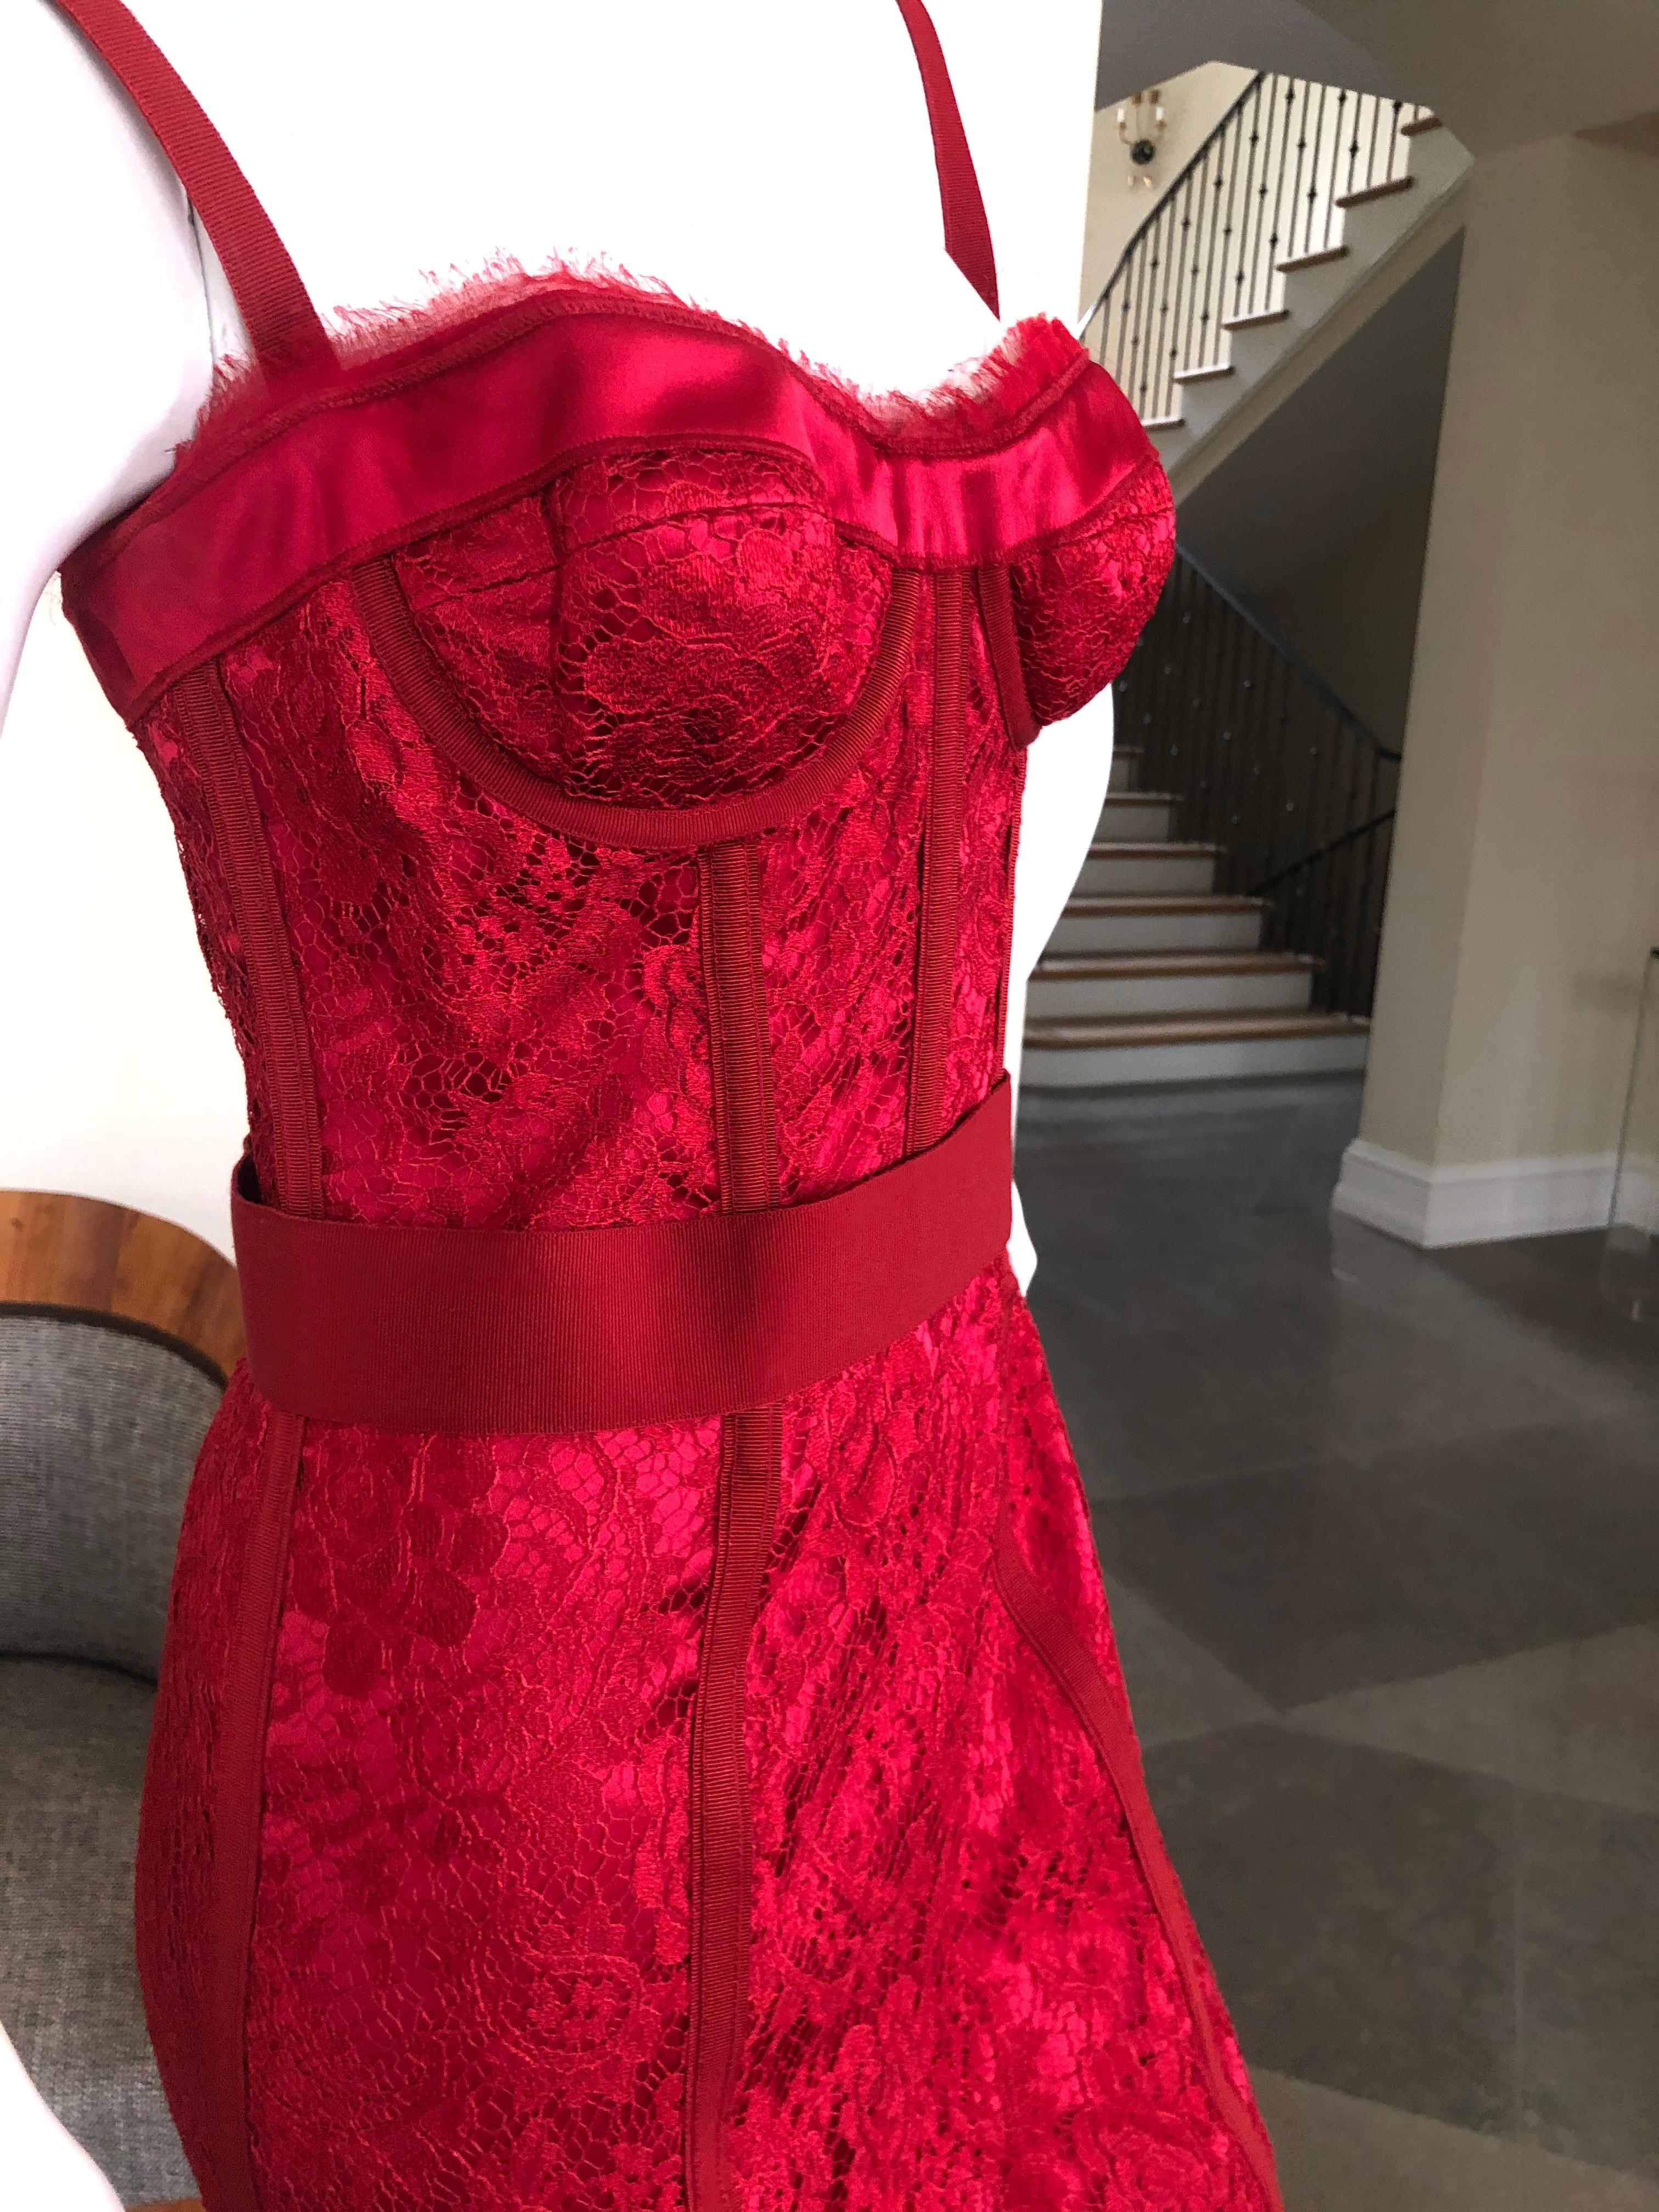  Dolce & Gabbana Sexy Red Lace Vintage Corset Cocktail Dress.
 There is a full corset. 
Zips up the back
This is so wonderful, so sexy. the photos don't do it justice.
Size 44, but runs small.
 Bust 34